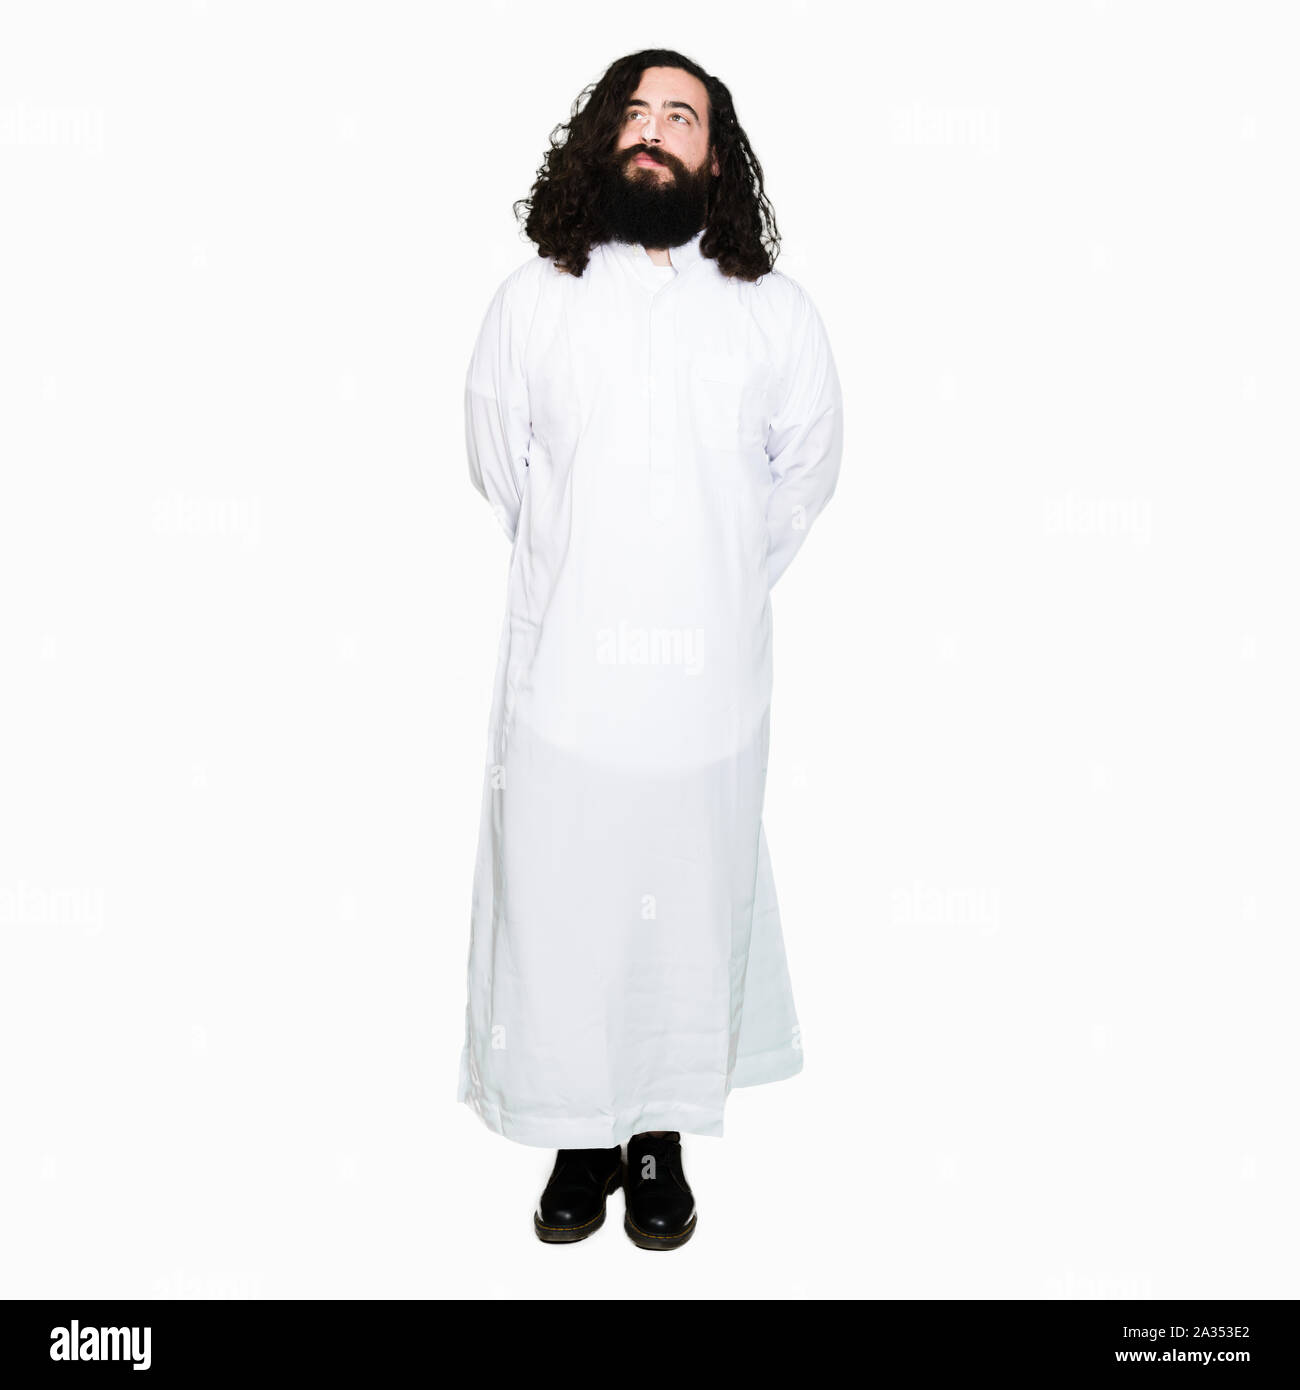 Man wearing Jesus Christ costume looking away to side with smile on face, natural expression. Laughing confident. Stock Photo